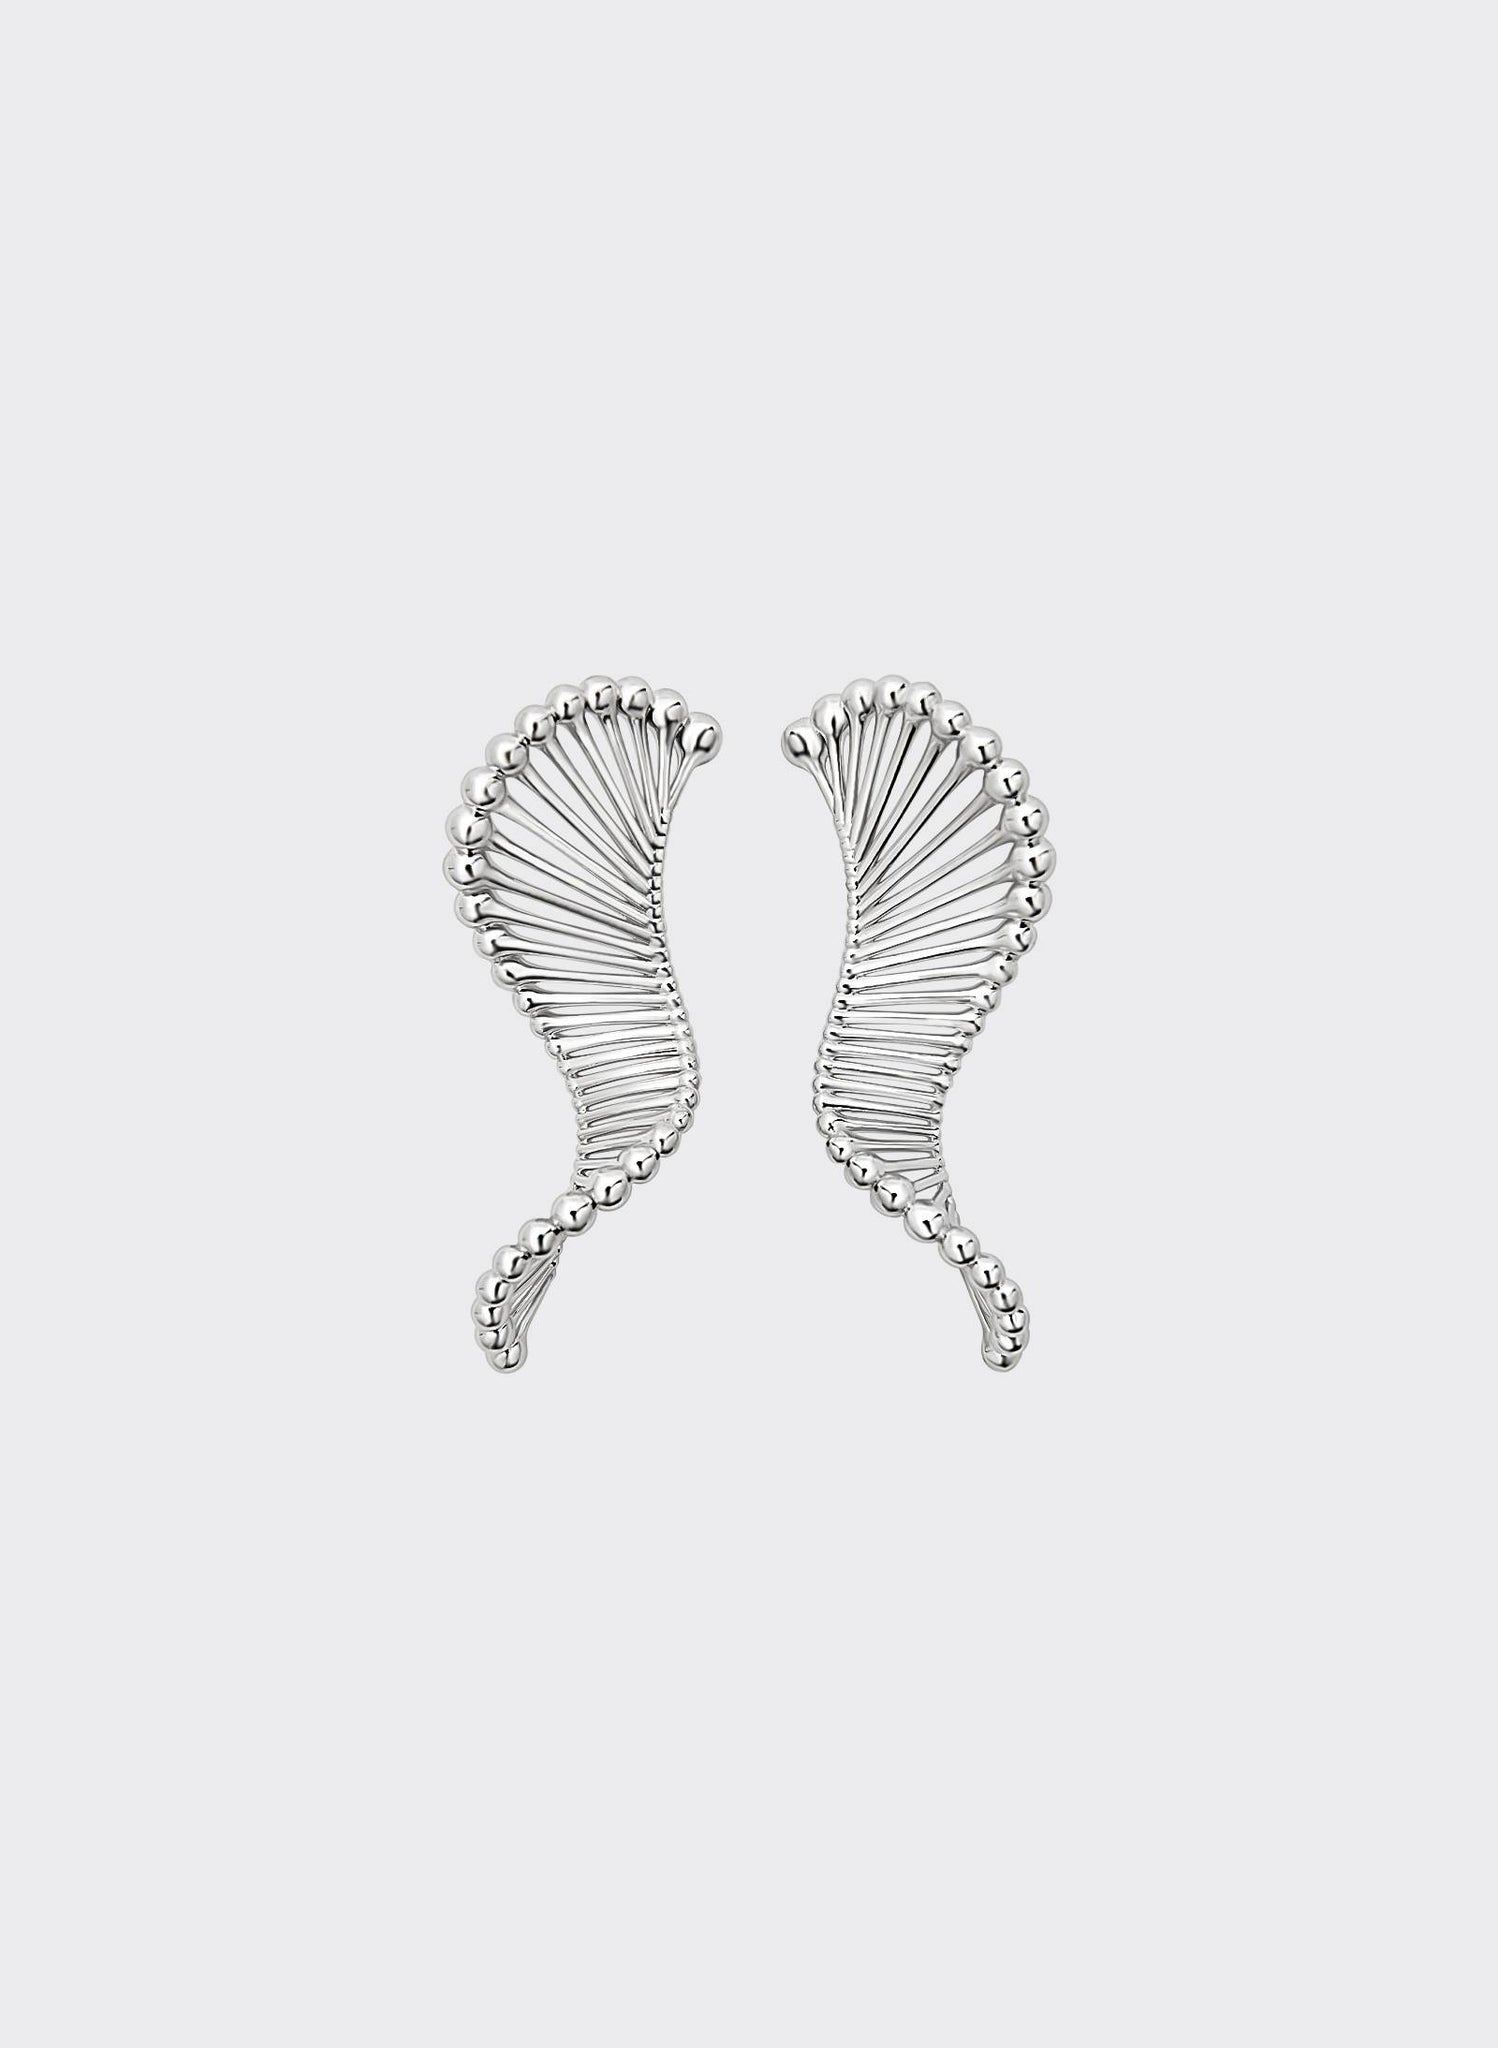 DNA Small Earrings